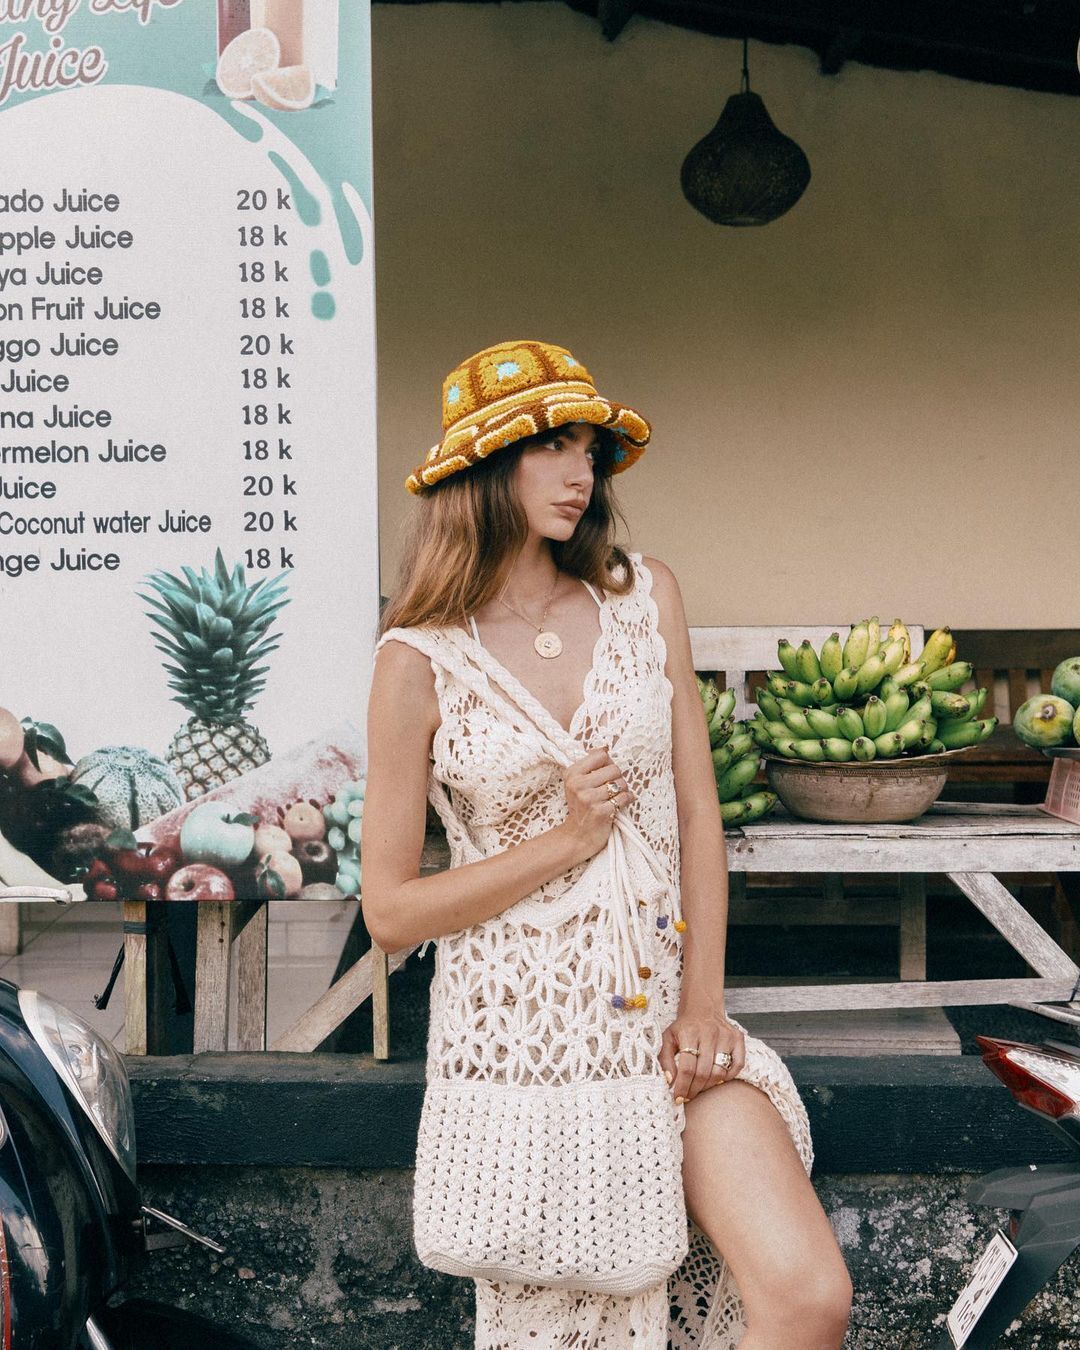 How to wear crochet in summer: 5 fashion ideas you'll want to repeat